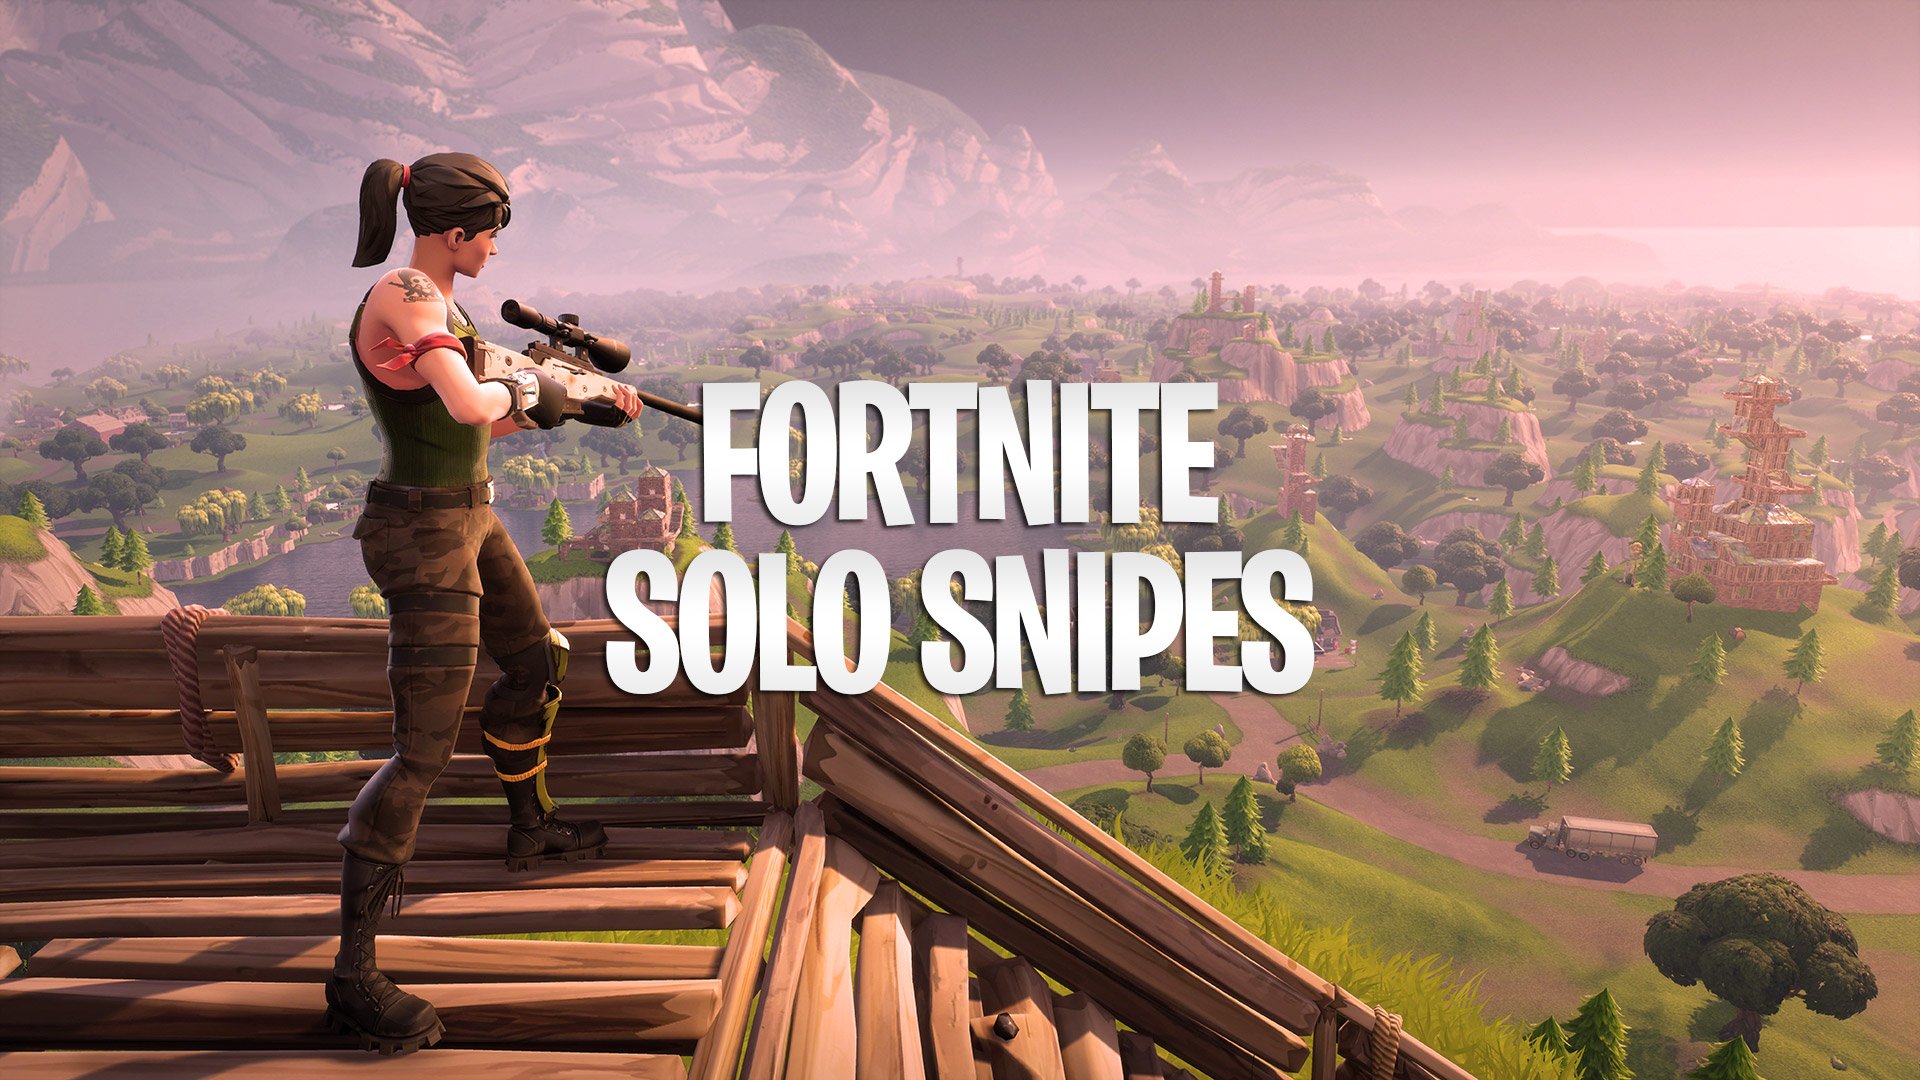 Fortnite Solo Snipes How To Join Pro Discords Prosettings Com - fortnite solo snipes discords